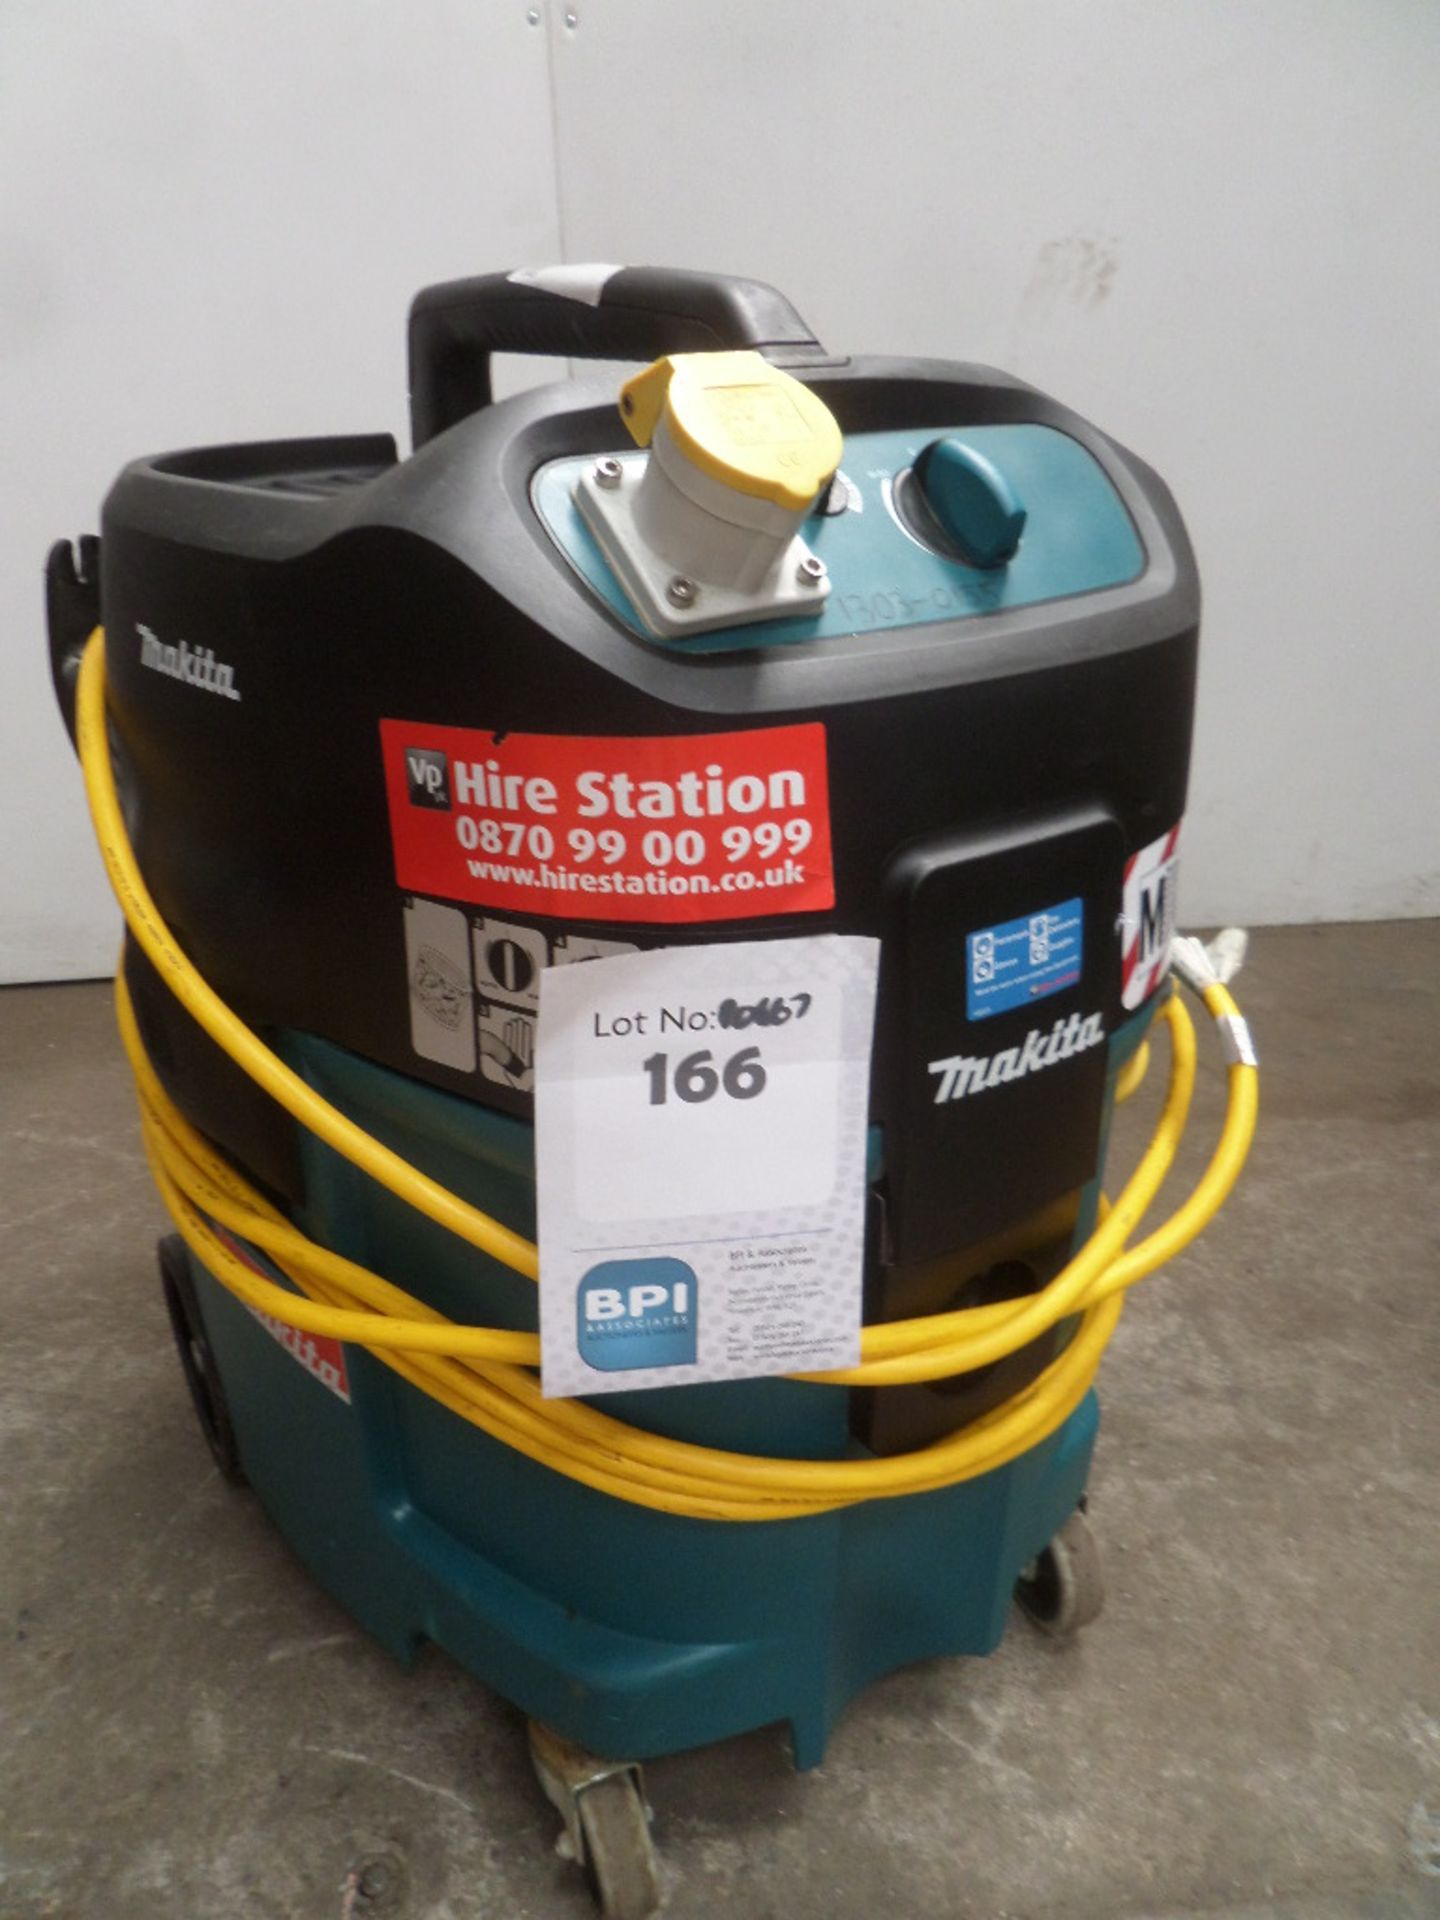 MAKITA 447M {027089}  DUST EXTRACTION UNIT 110v 32amp connection - Power there is working well - req